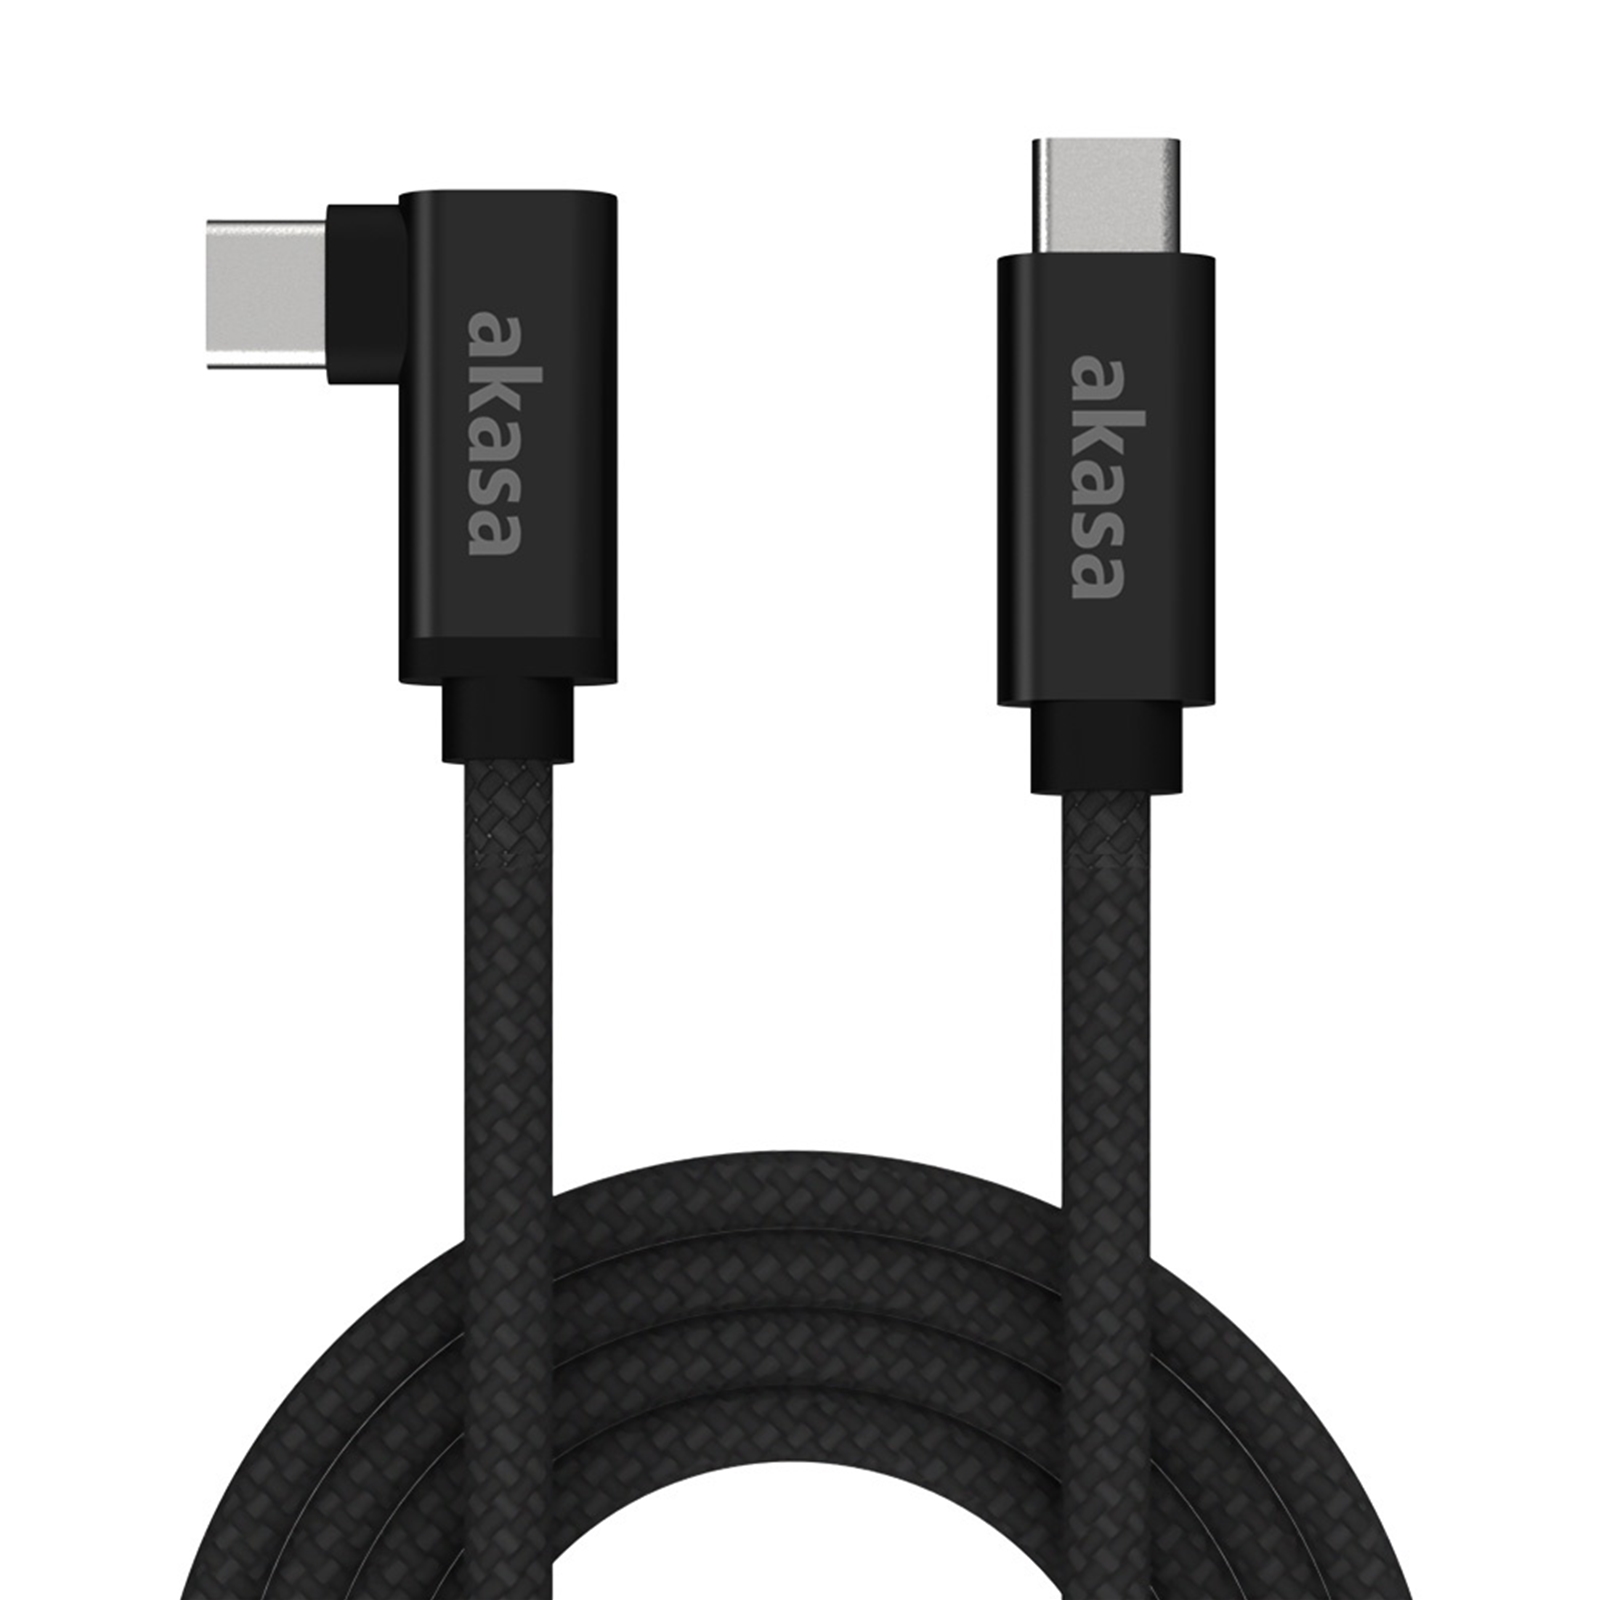 AK-CBUB66-20BK AKASA AK-CBUB66-20BK Data Cable. Right-Angled USB 3.2 Gen 2x2 Type-C (M) to USB 3.2 Gen 2x2 Type-C (M), 2m, Black, SuperSpeed USB up to 20Gbps Data, Fast Charging 100W Power Delivery, Supports DisplayPort Alternate Mode for 4K@60Hz UHD Video Function